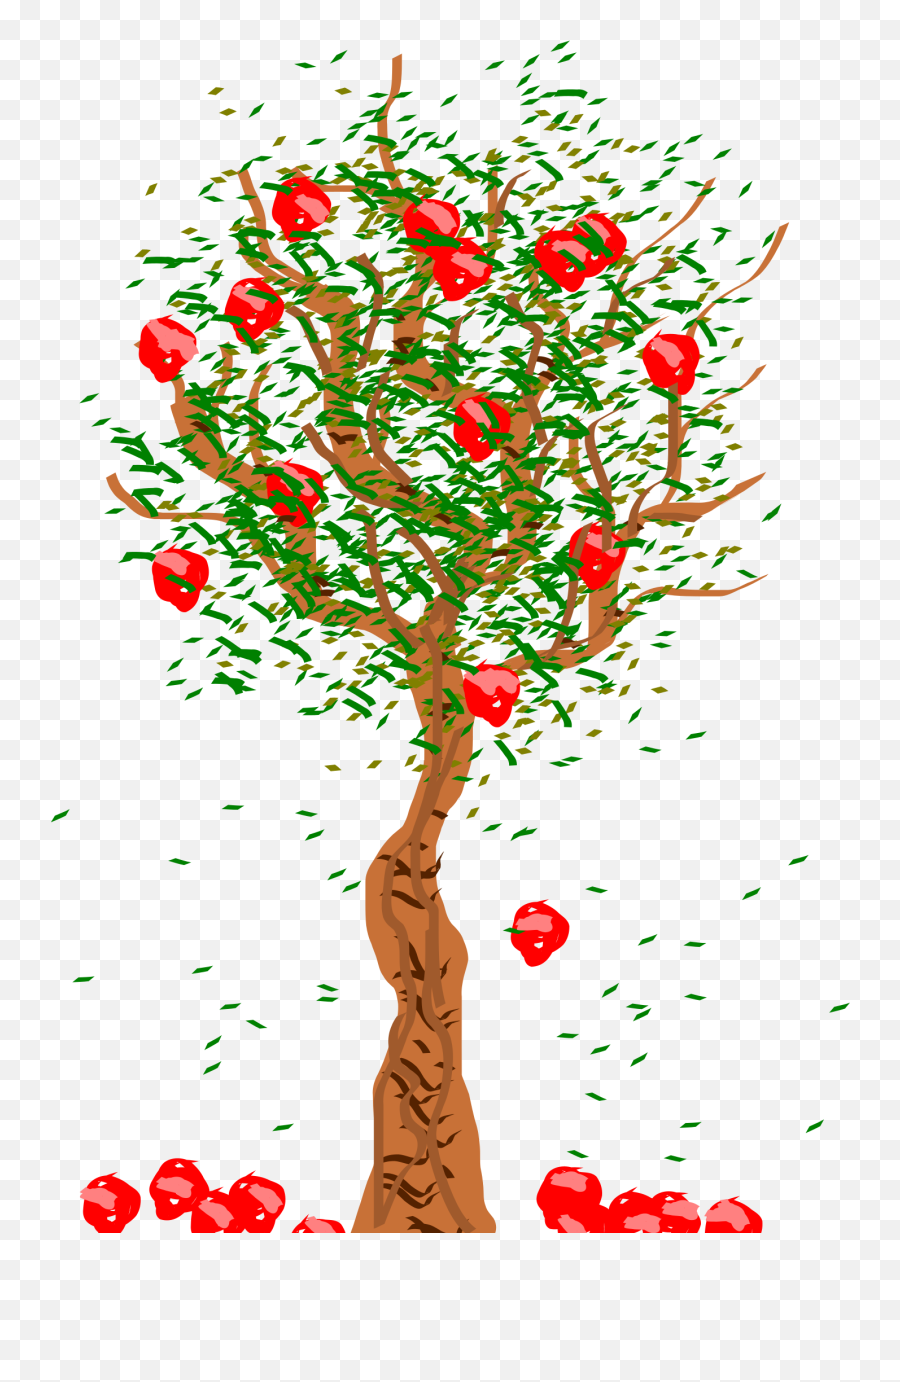 Library Of Free Jpg Apple Tree Png Files Clipart Art 2019 - Apple Falling From Trees,Fall Clipart Png